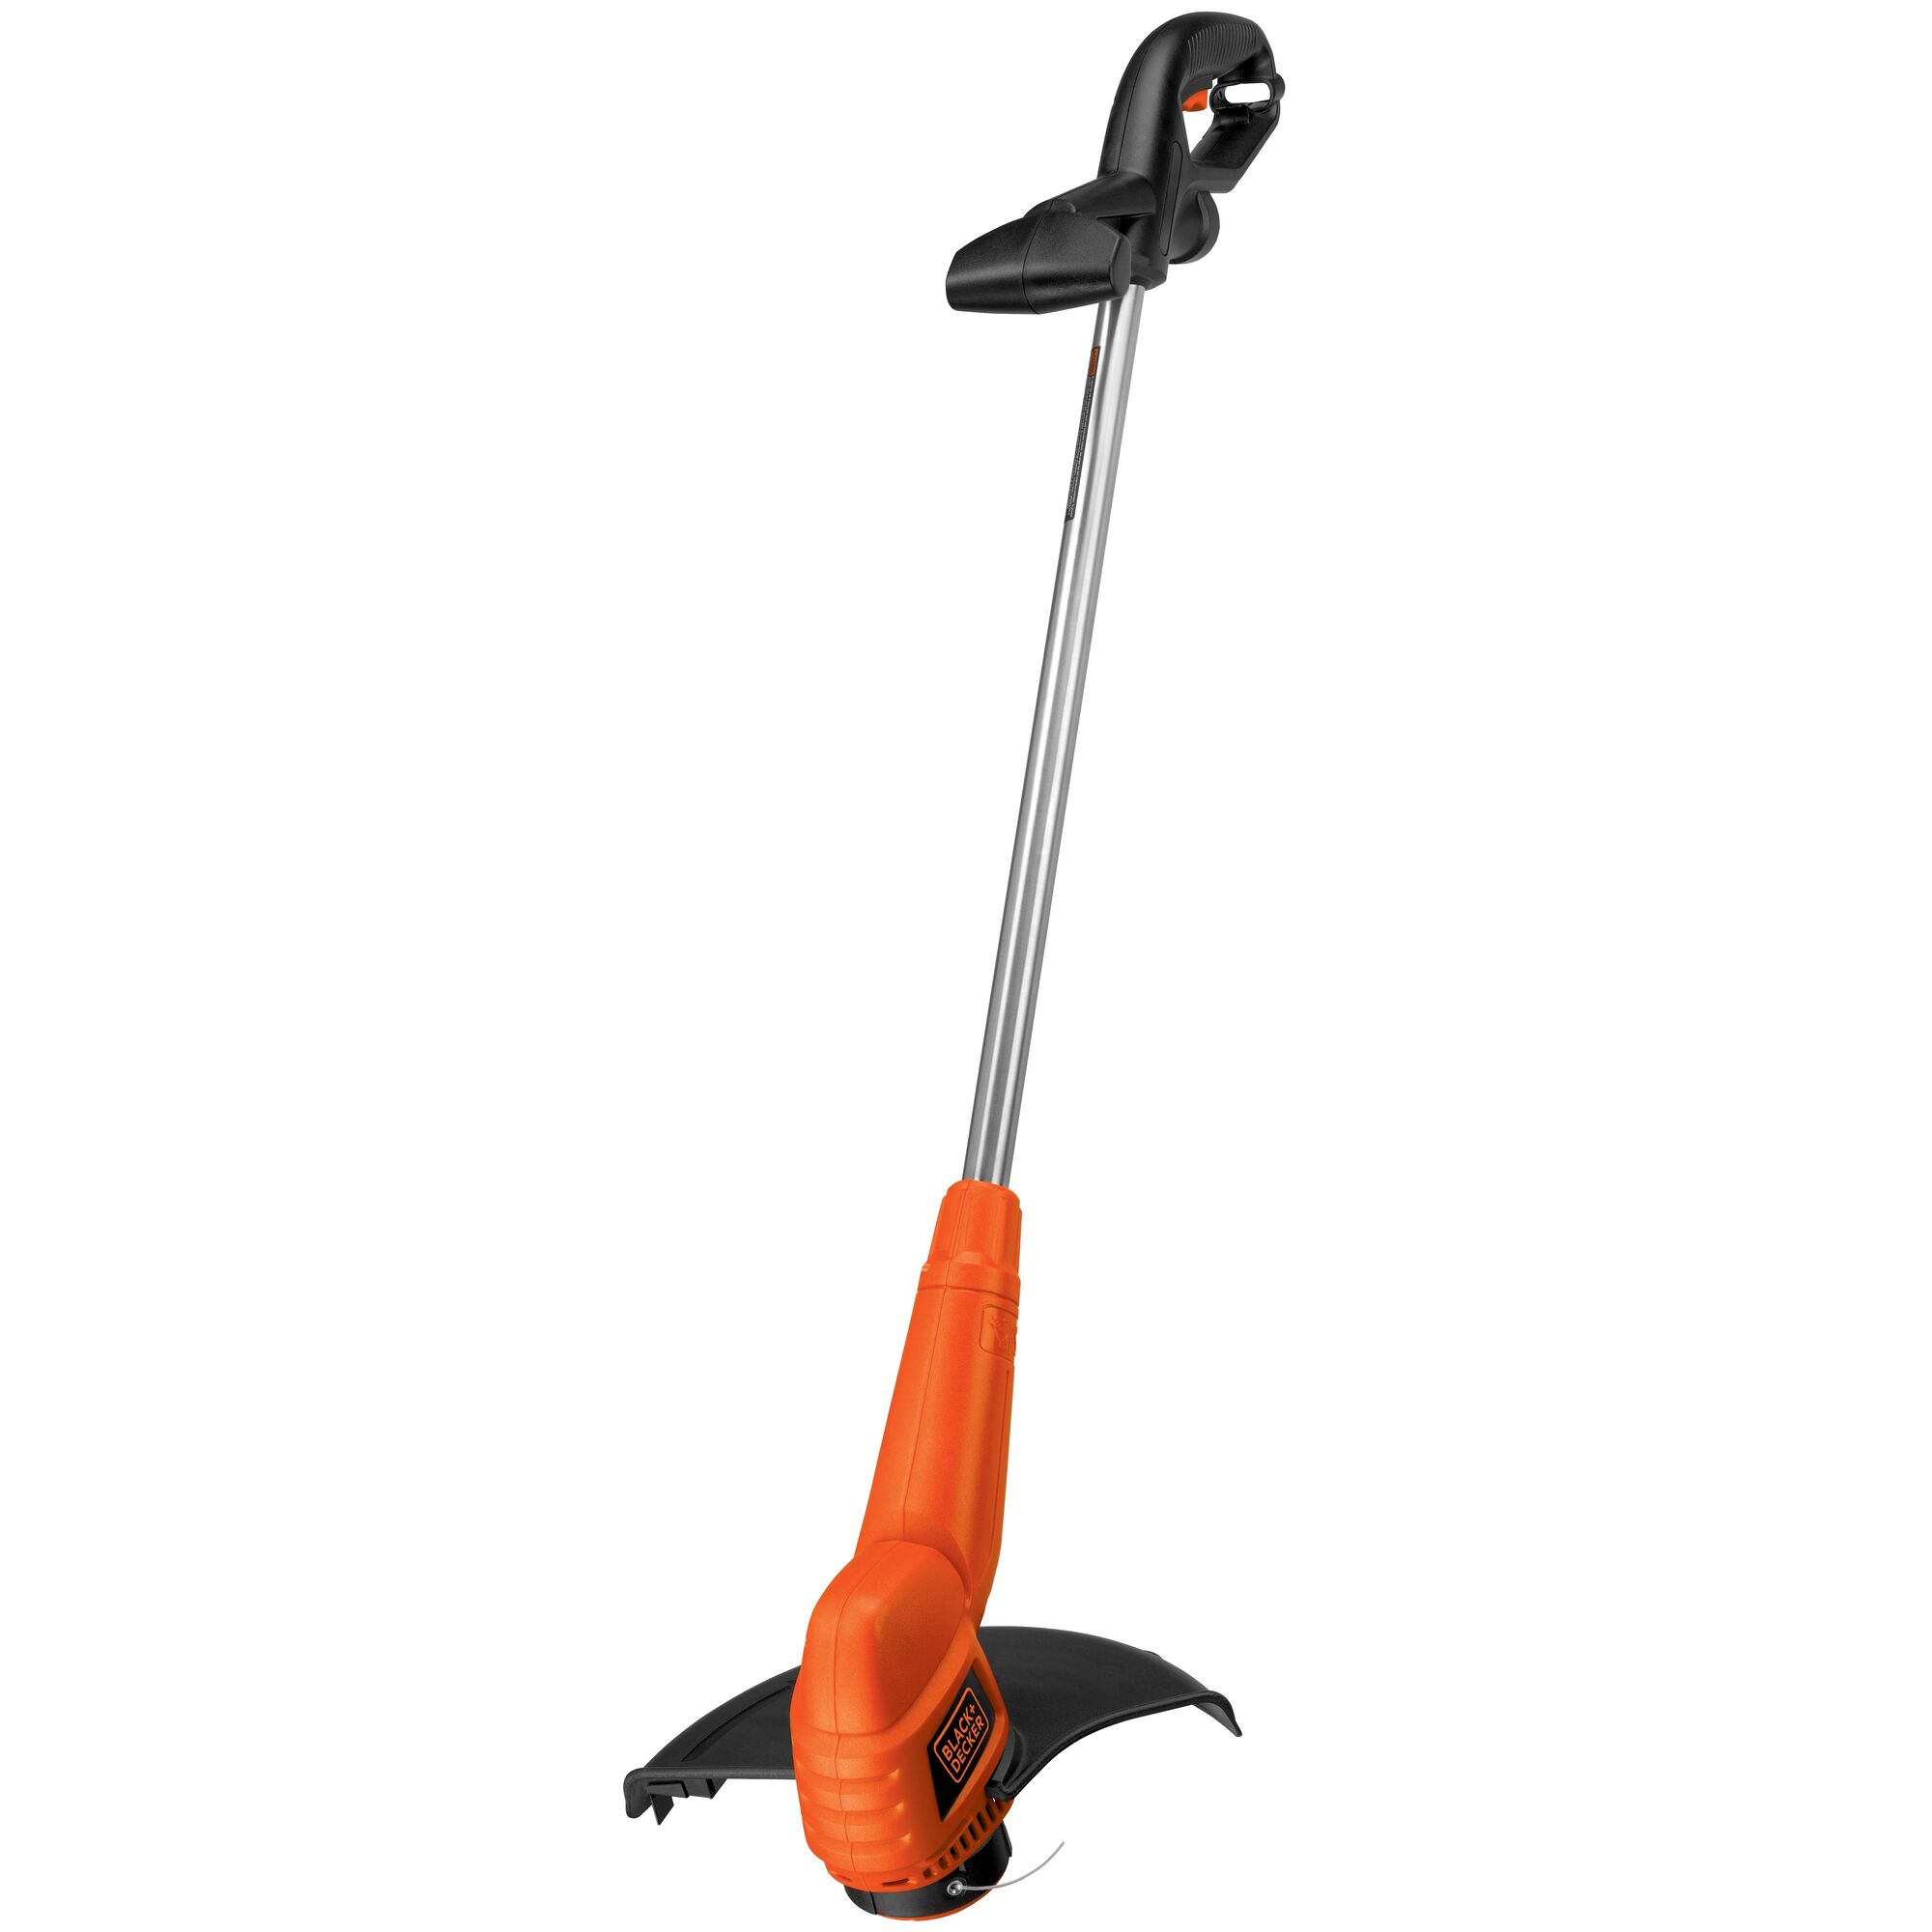 Profile of 13 inch 2 in 1 Trimmer / Edger.